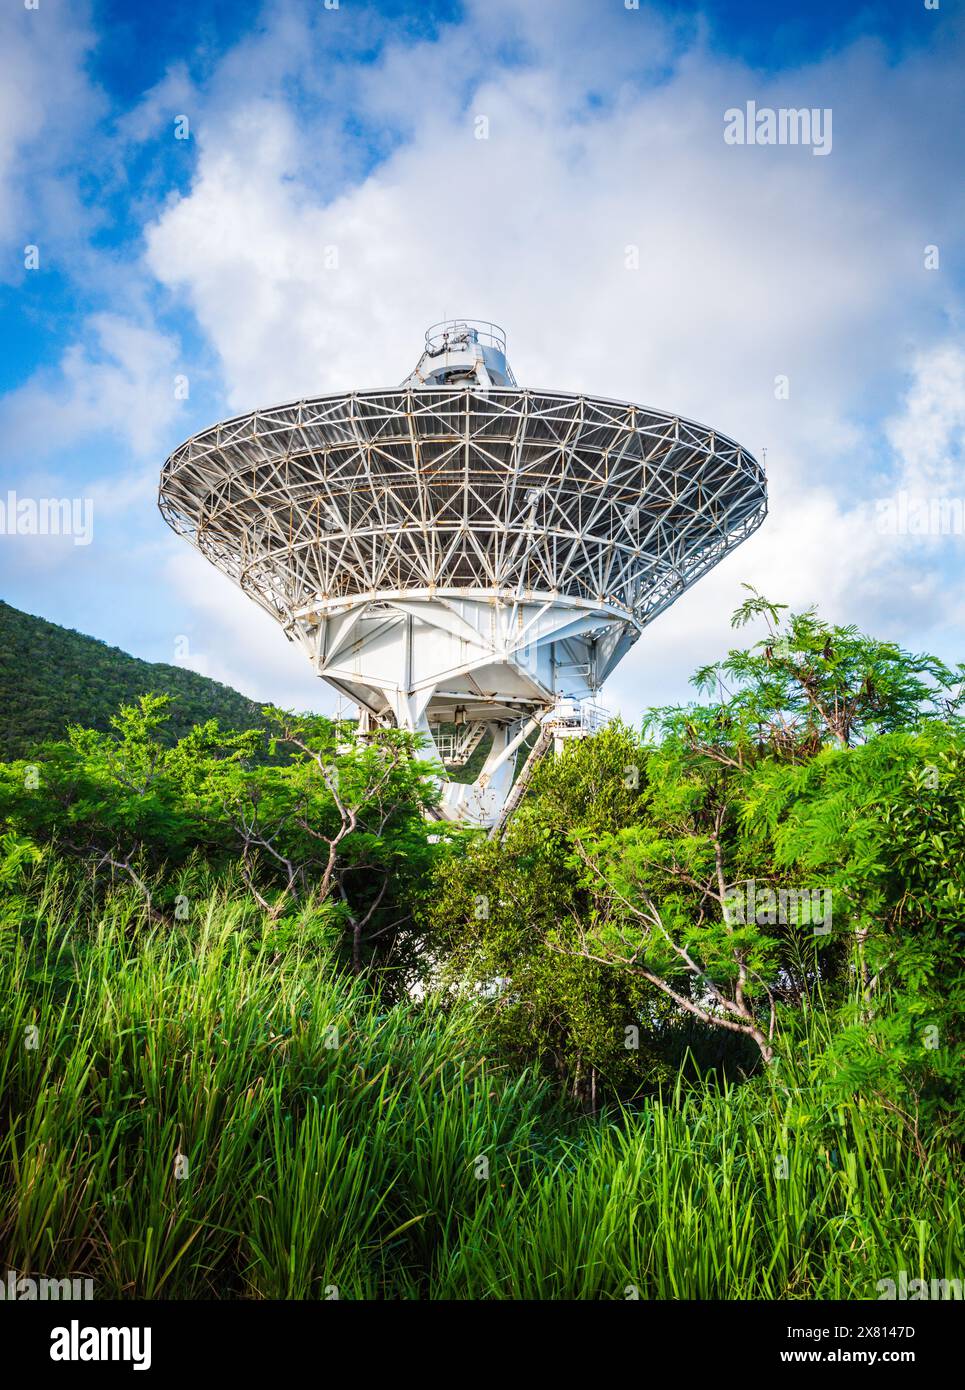 St. Croix, US Virgin Islands - September 8, 2016:This is one of a network of observation stations across the US used to study the cosmos. Stock Photo